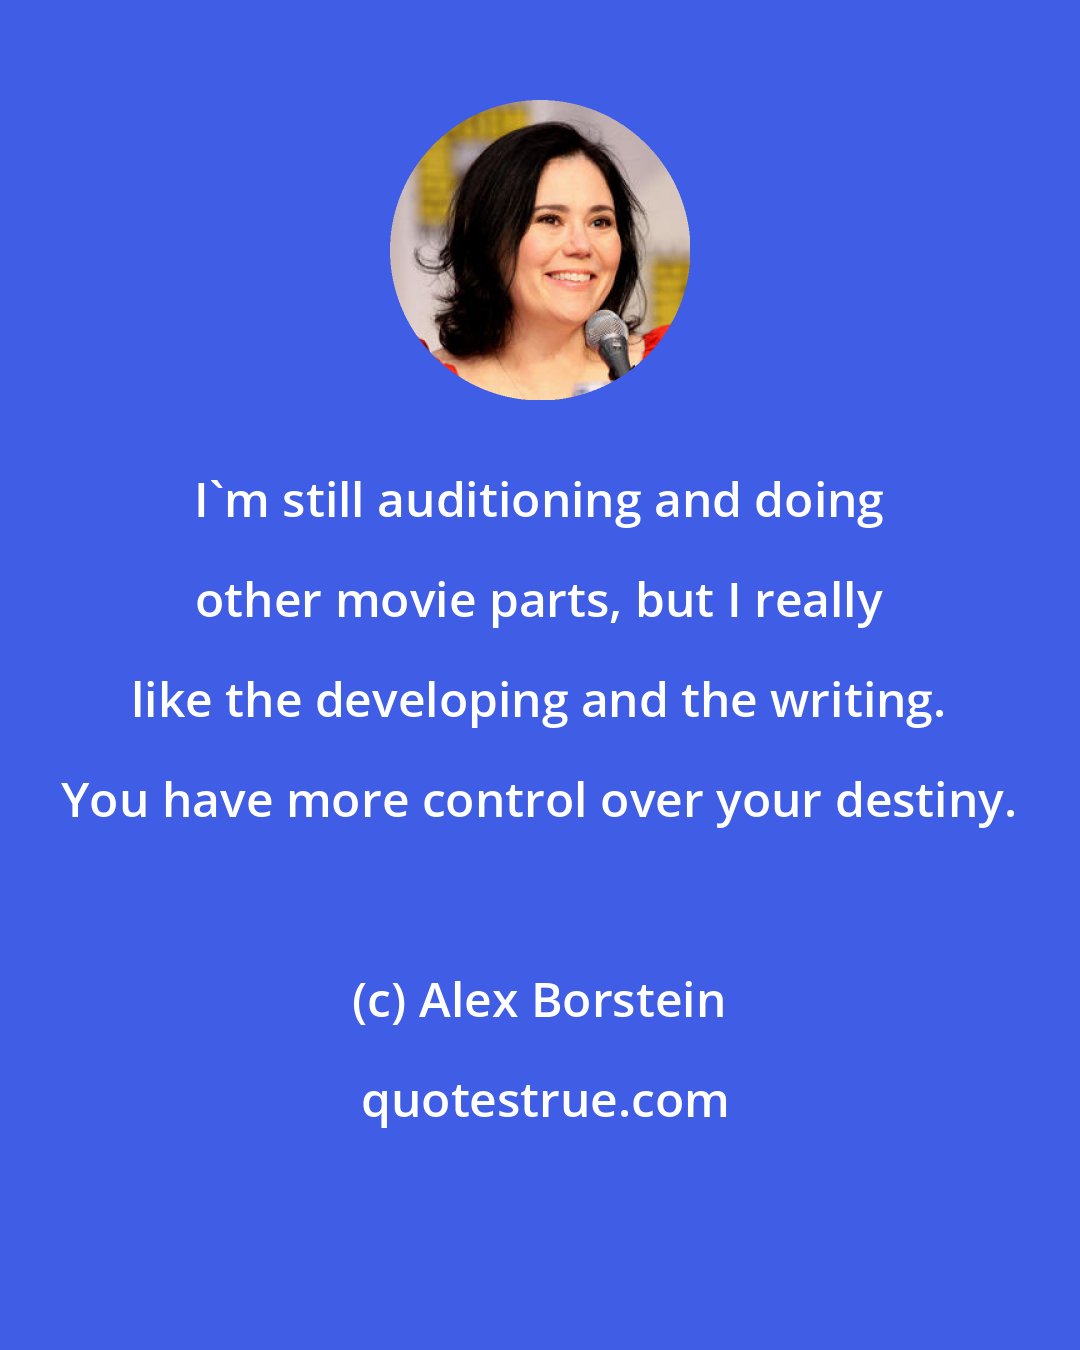 Alex Borstein: I'm still auditioning and doing other movie parts, but I really like the developing and the writing. You have more control over your destiny.